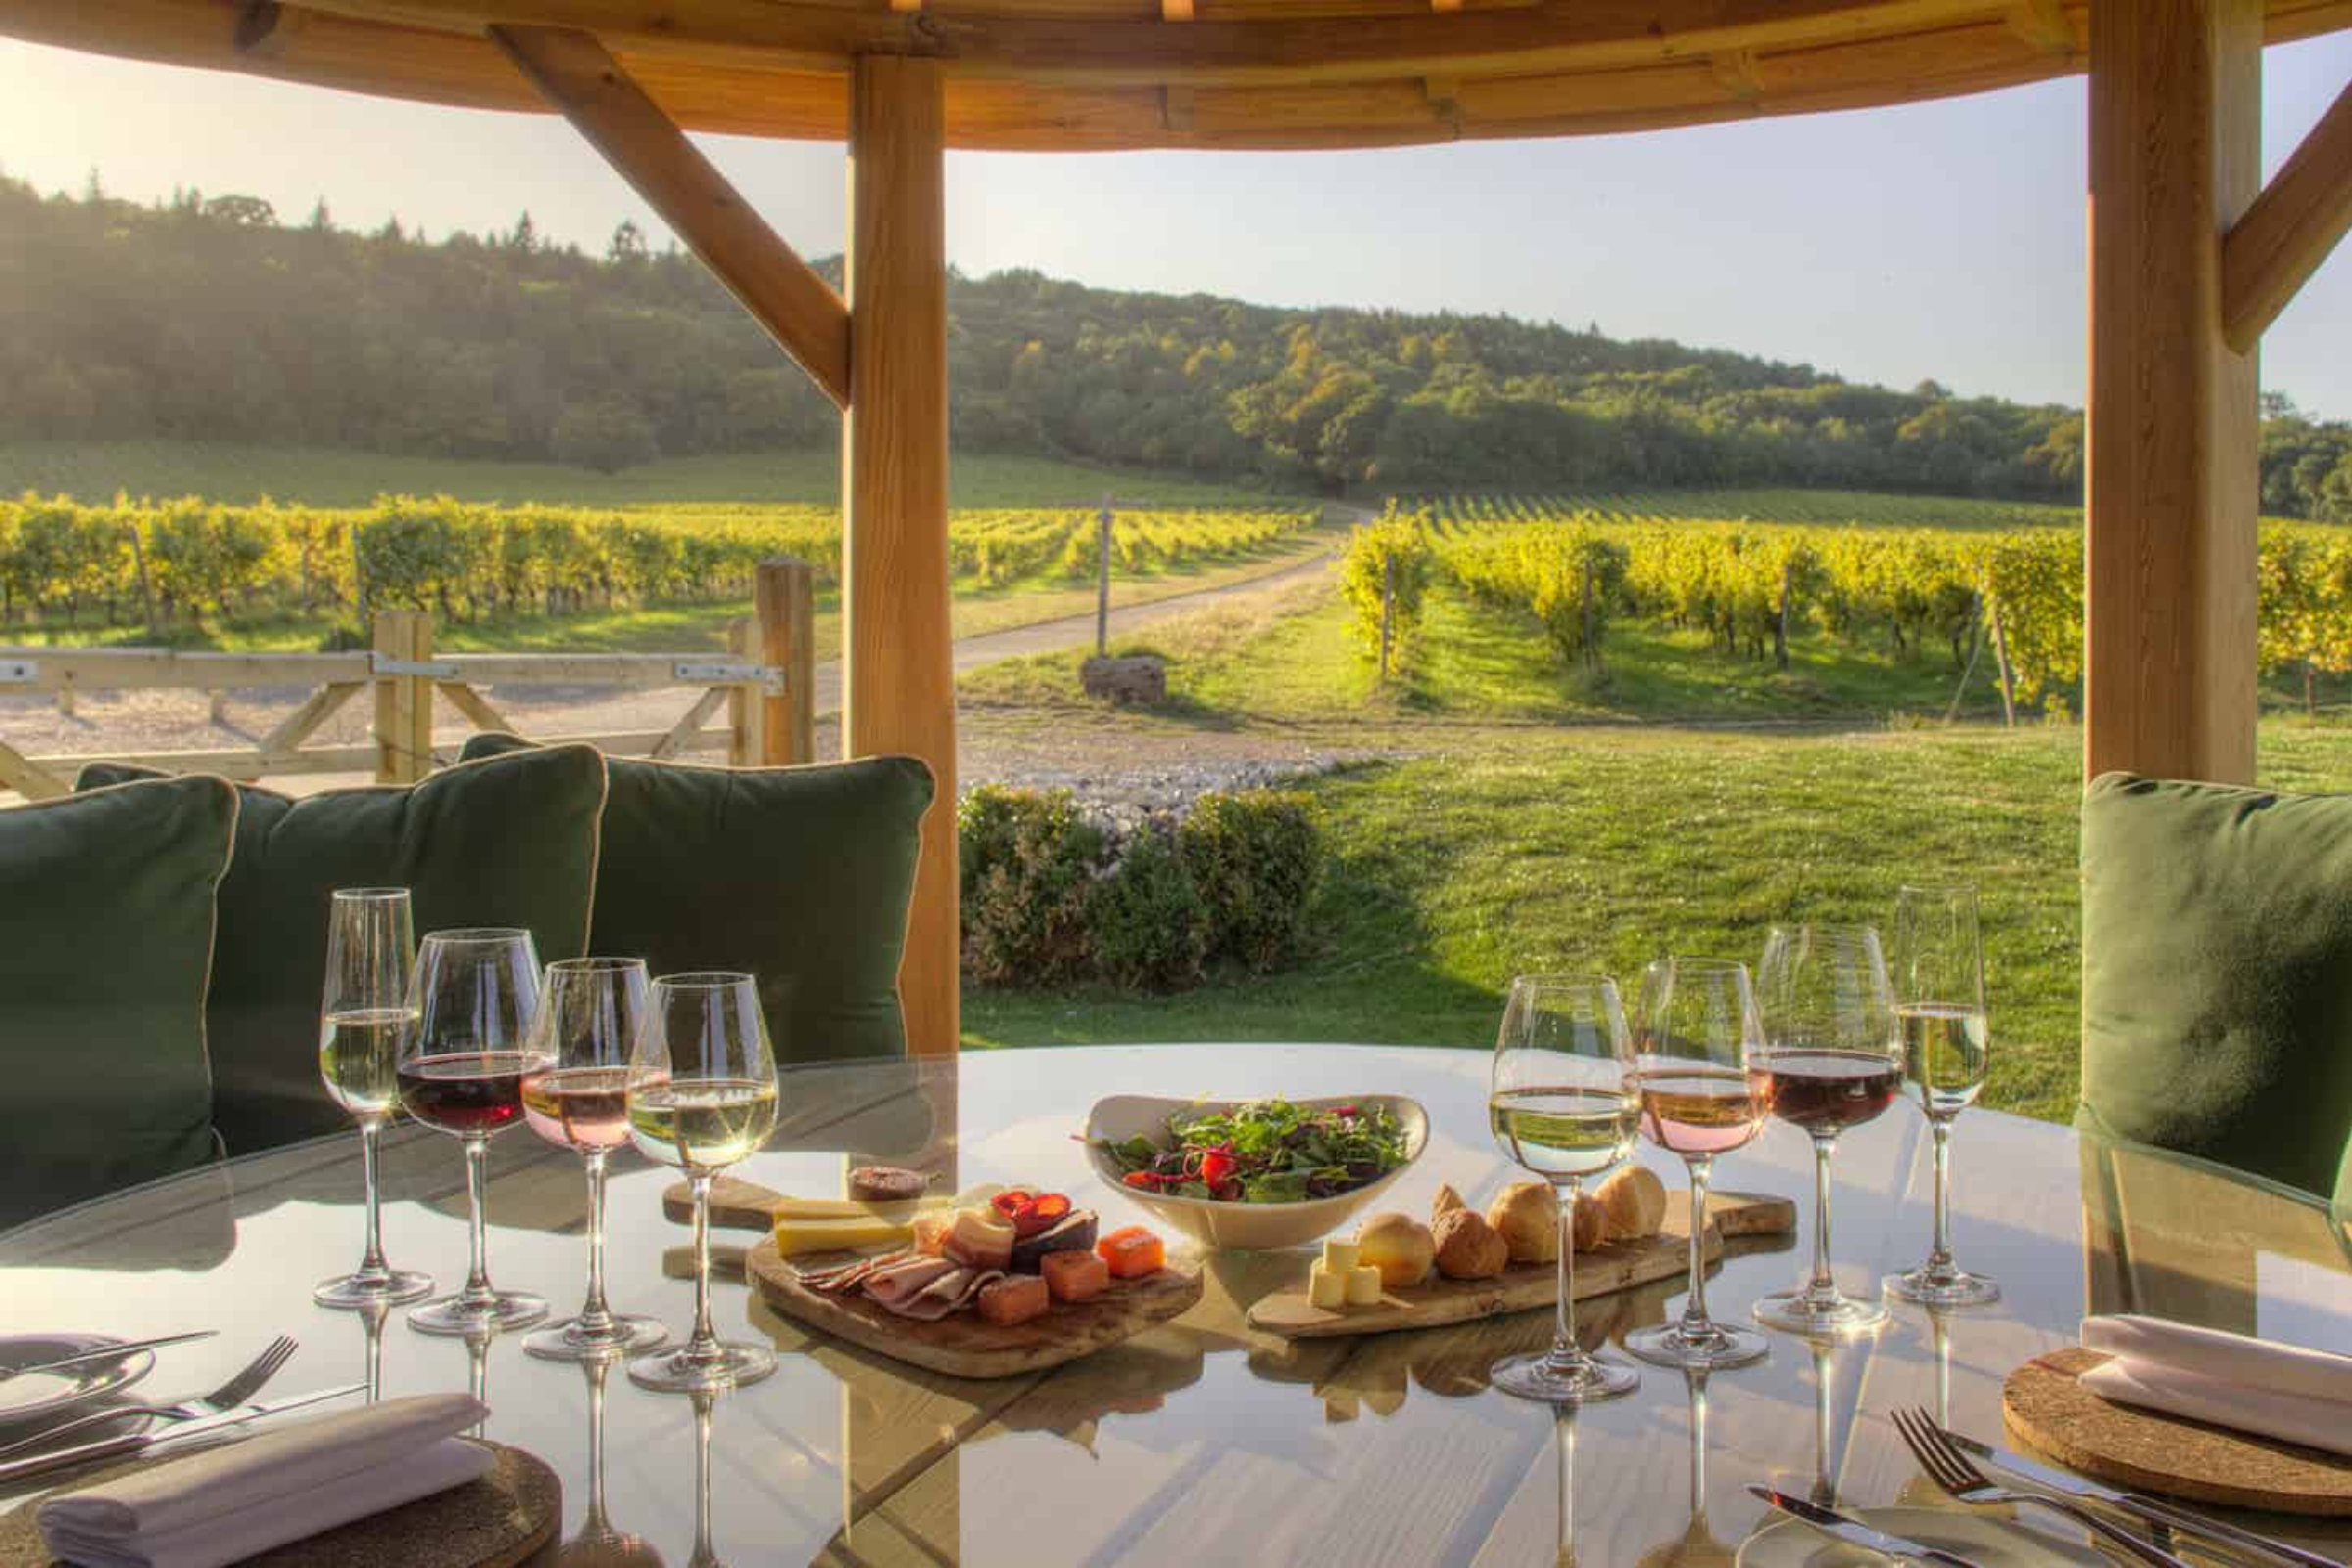 Vineyard Escapes: Wine Tasting In The Country